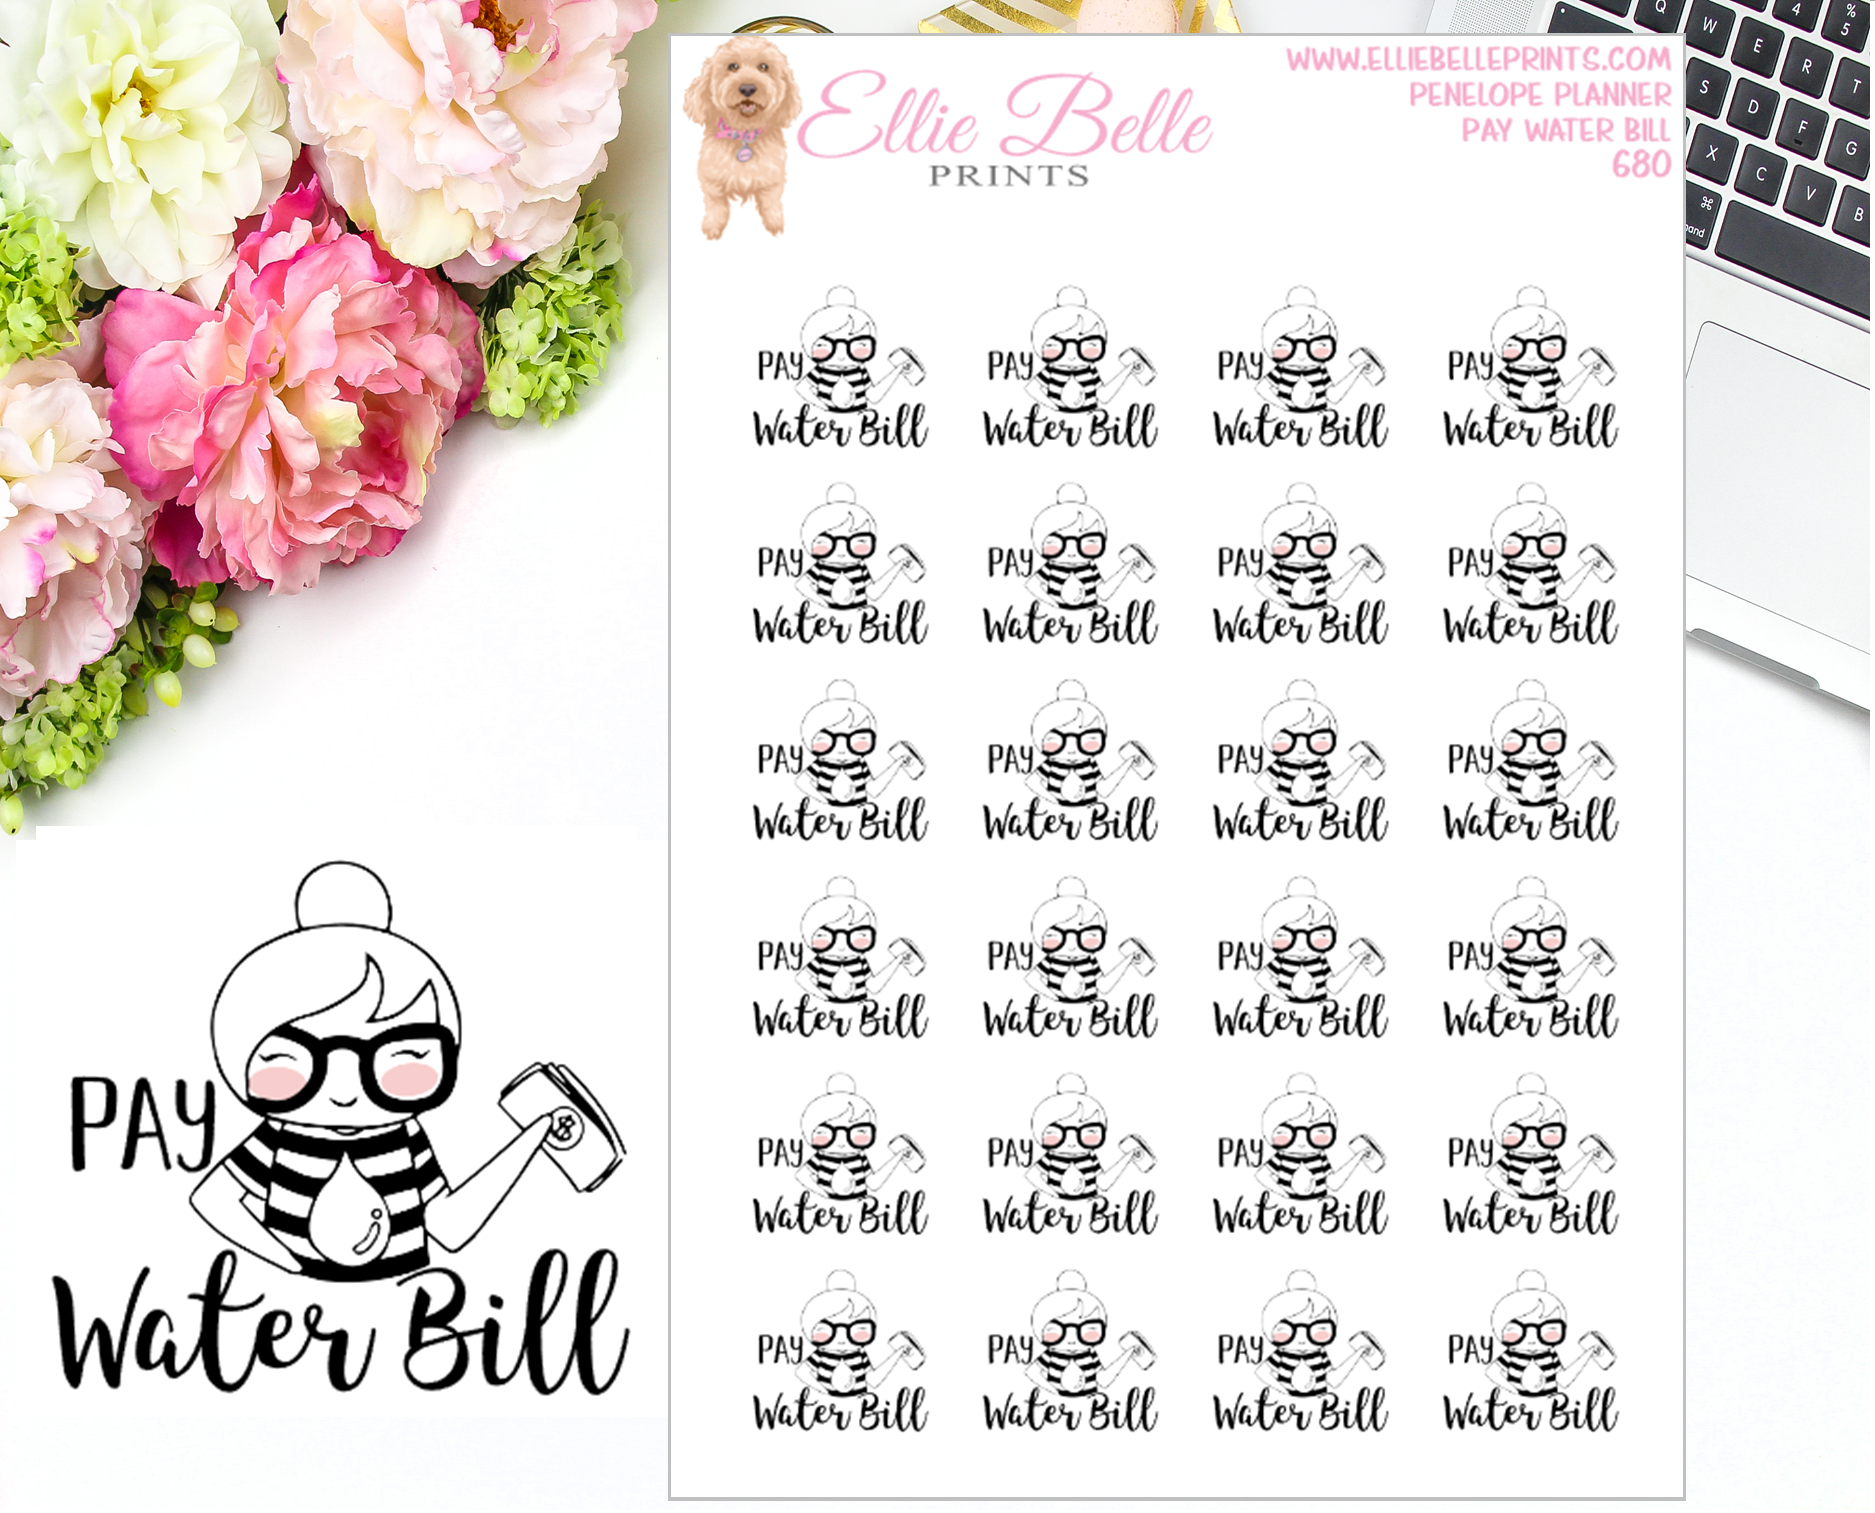 Pay Water Bill Stickers - Penelope Planner